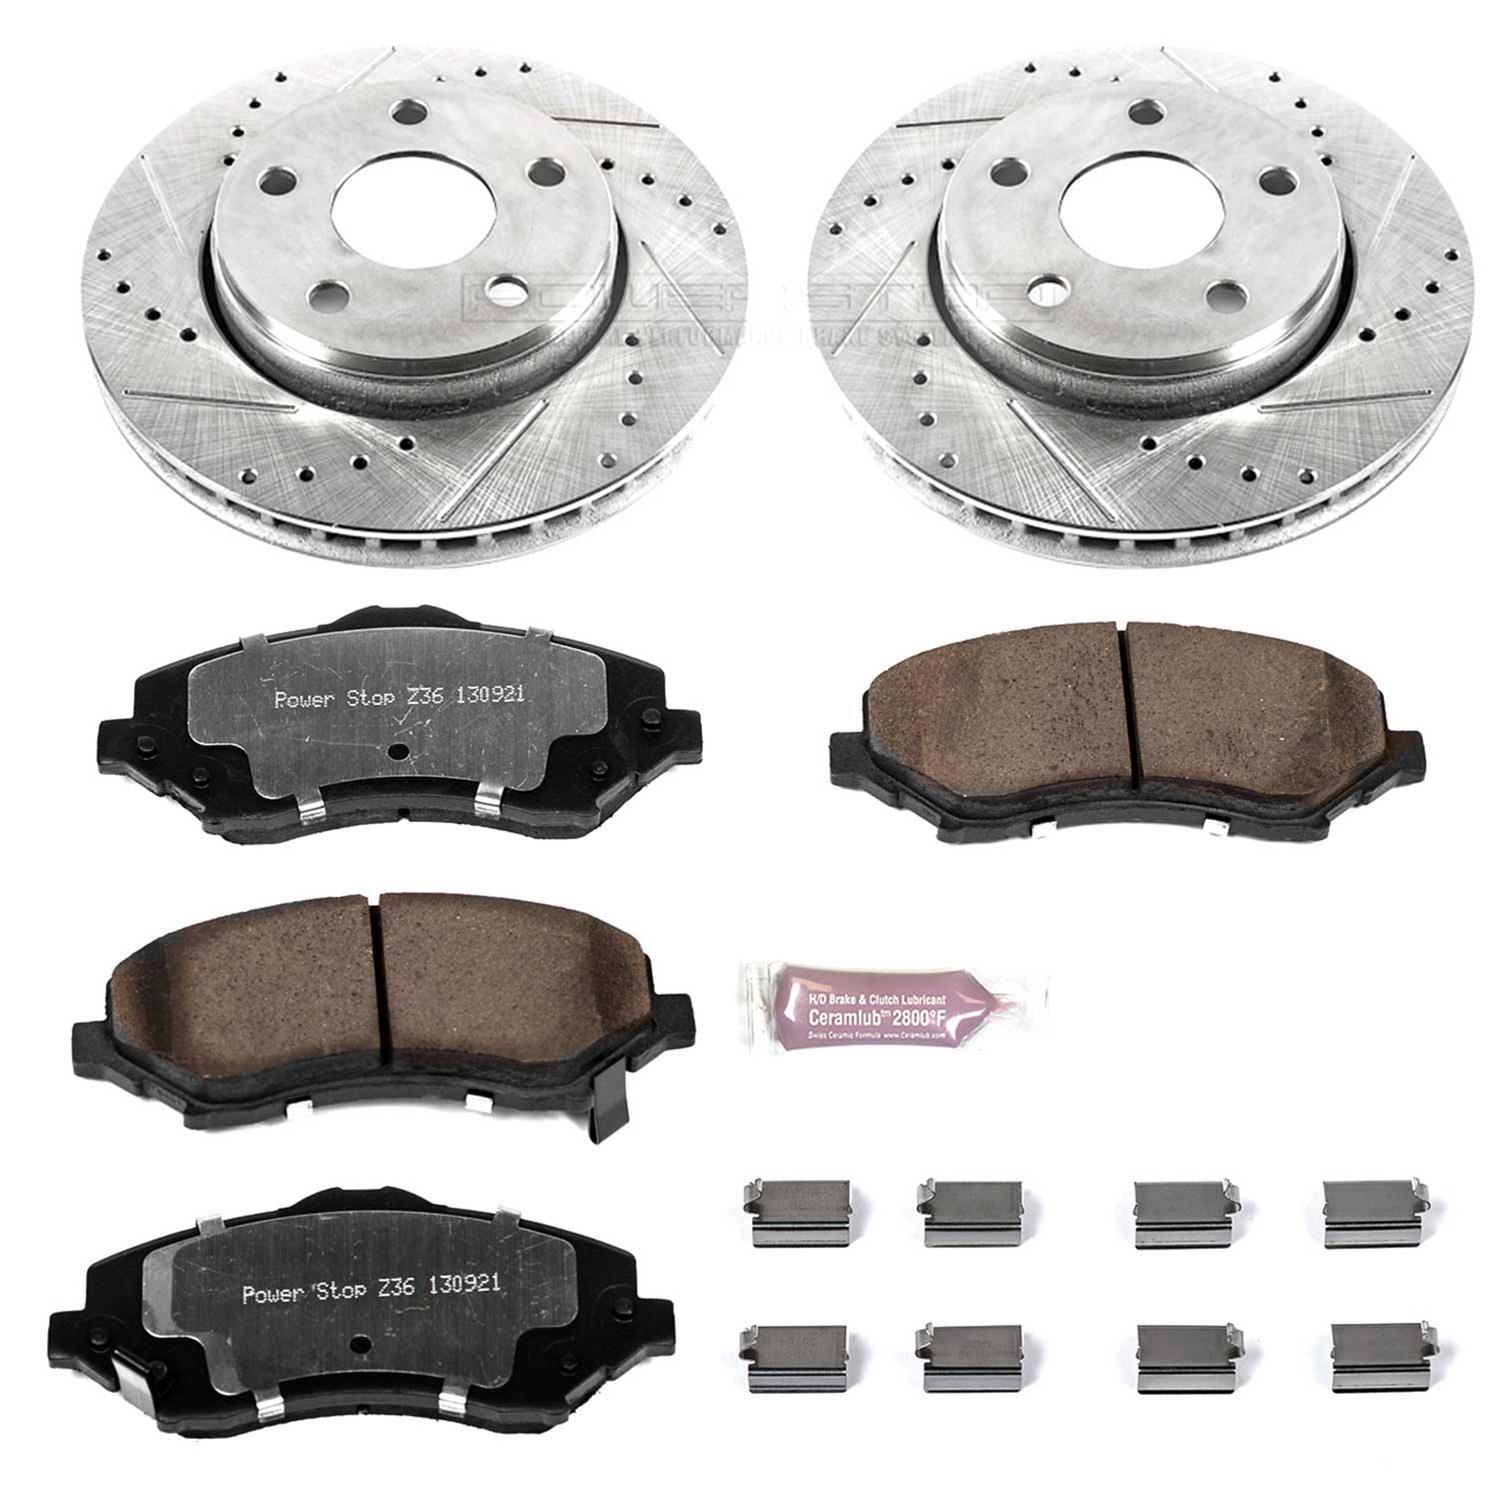 Power Stop K2798-36 Power Stop Z36 Truck and Tow Brake Upgrade Kits